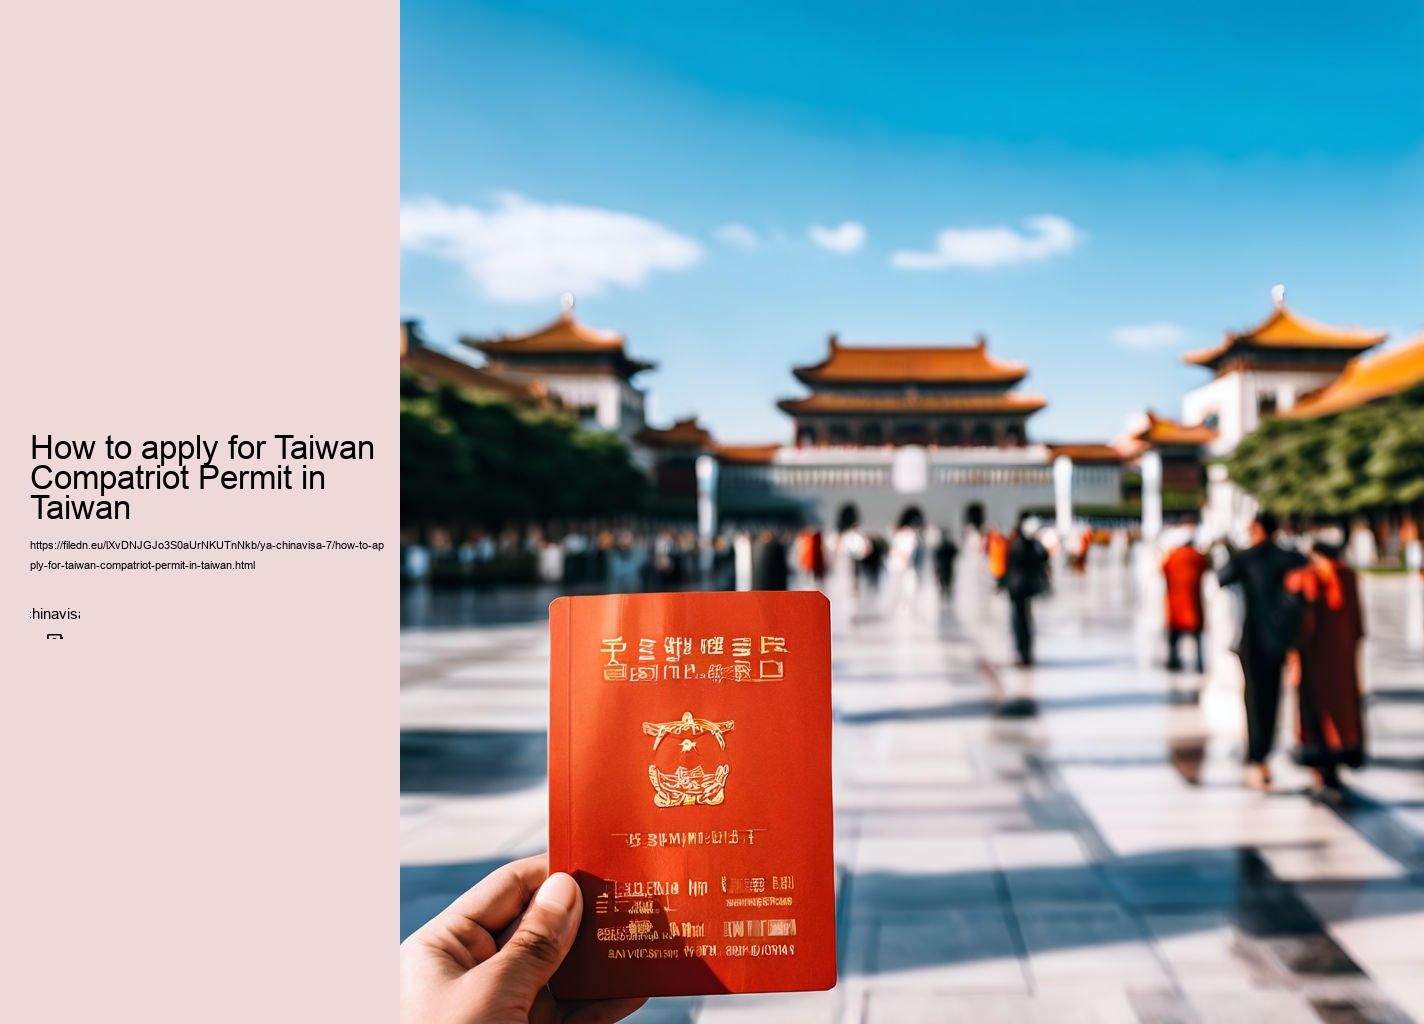 How to apply for Taiwan Compatriot Permit in Taiwan